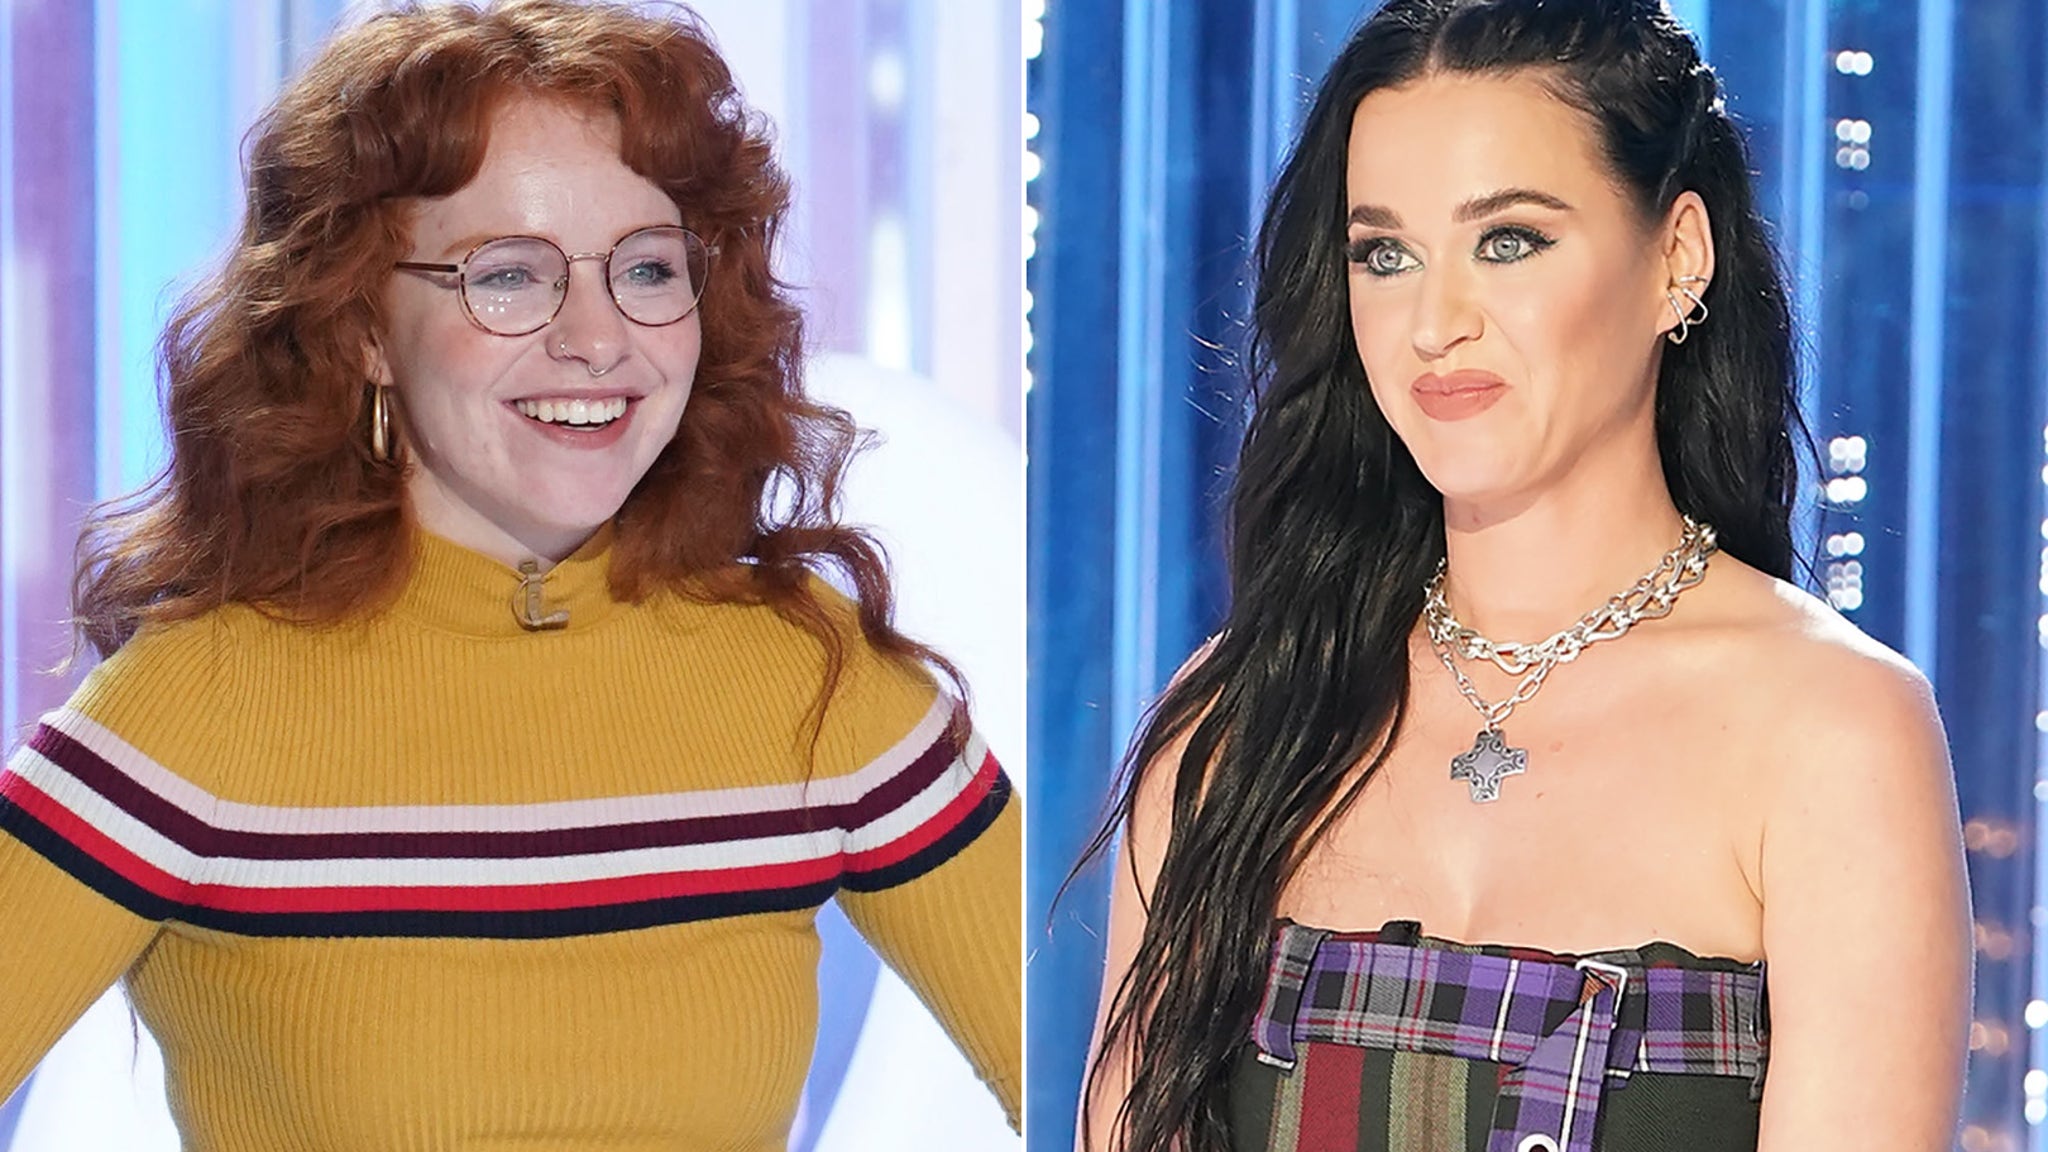 American Idol Contestant Calls Out Katy Perry for 'Mom Shaming' Joke